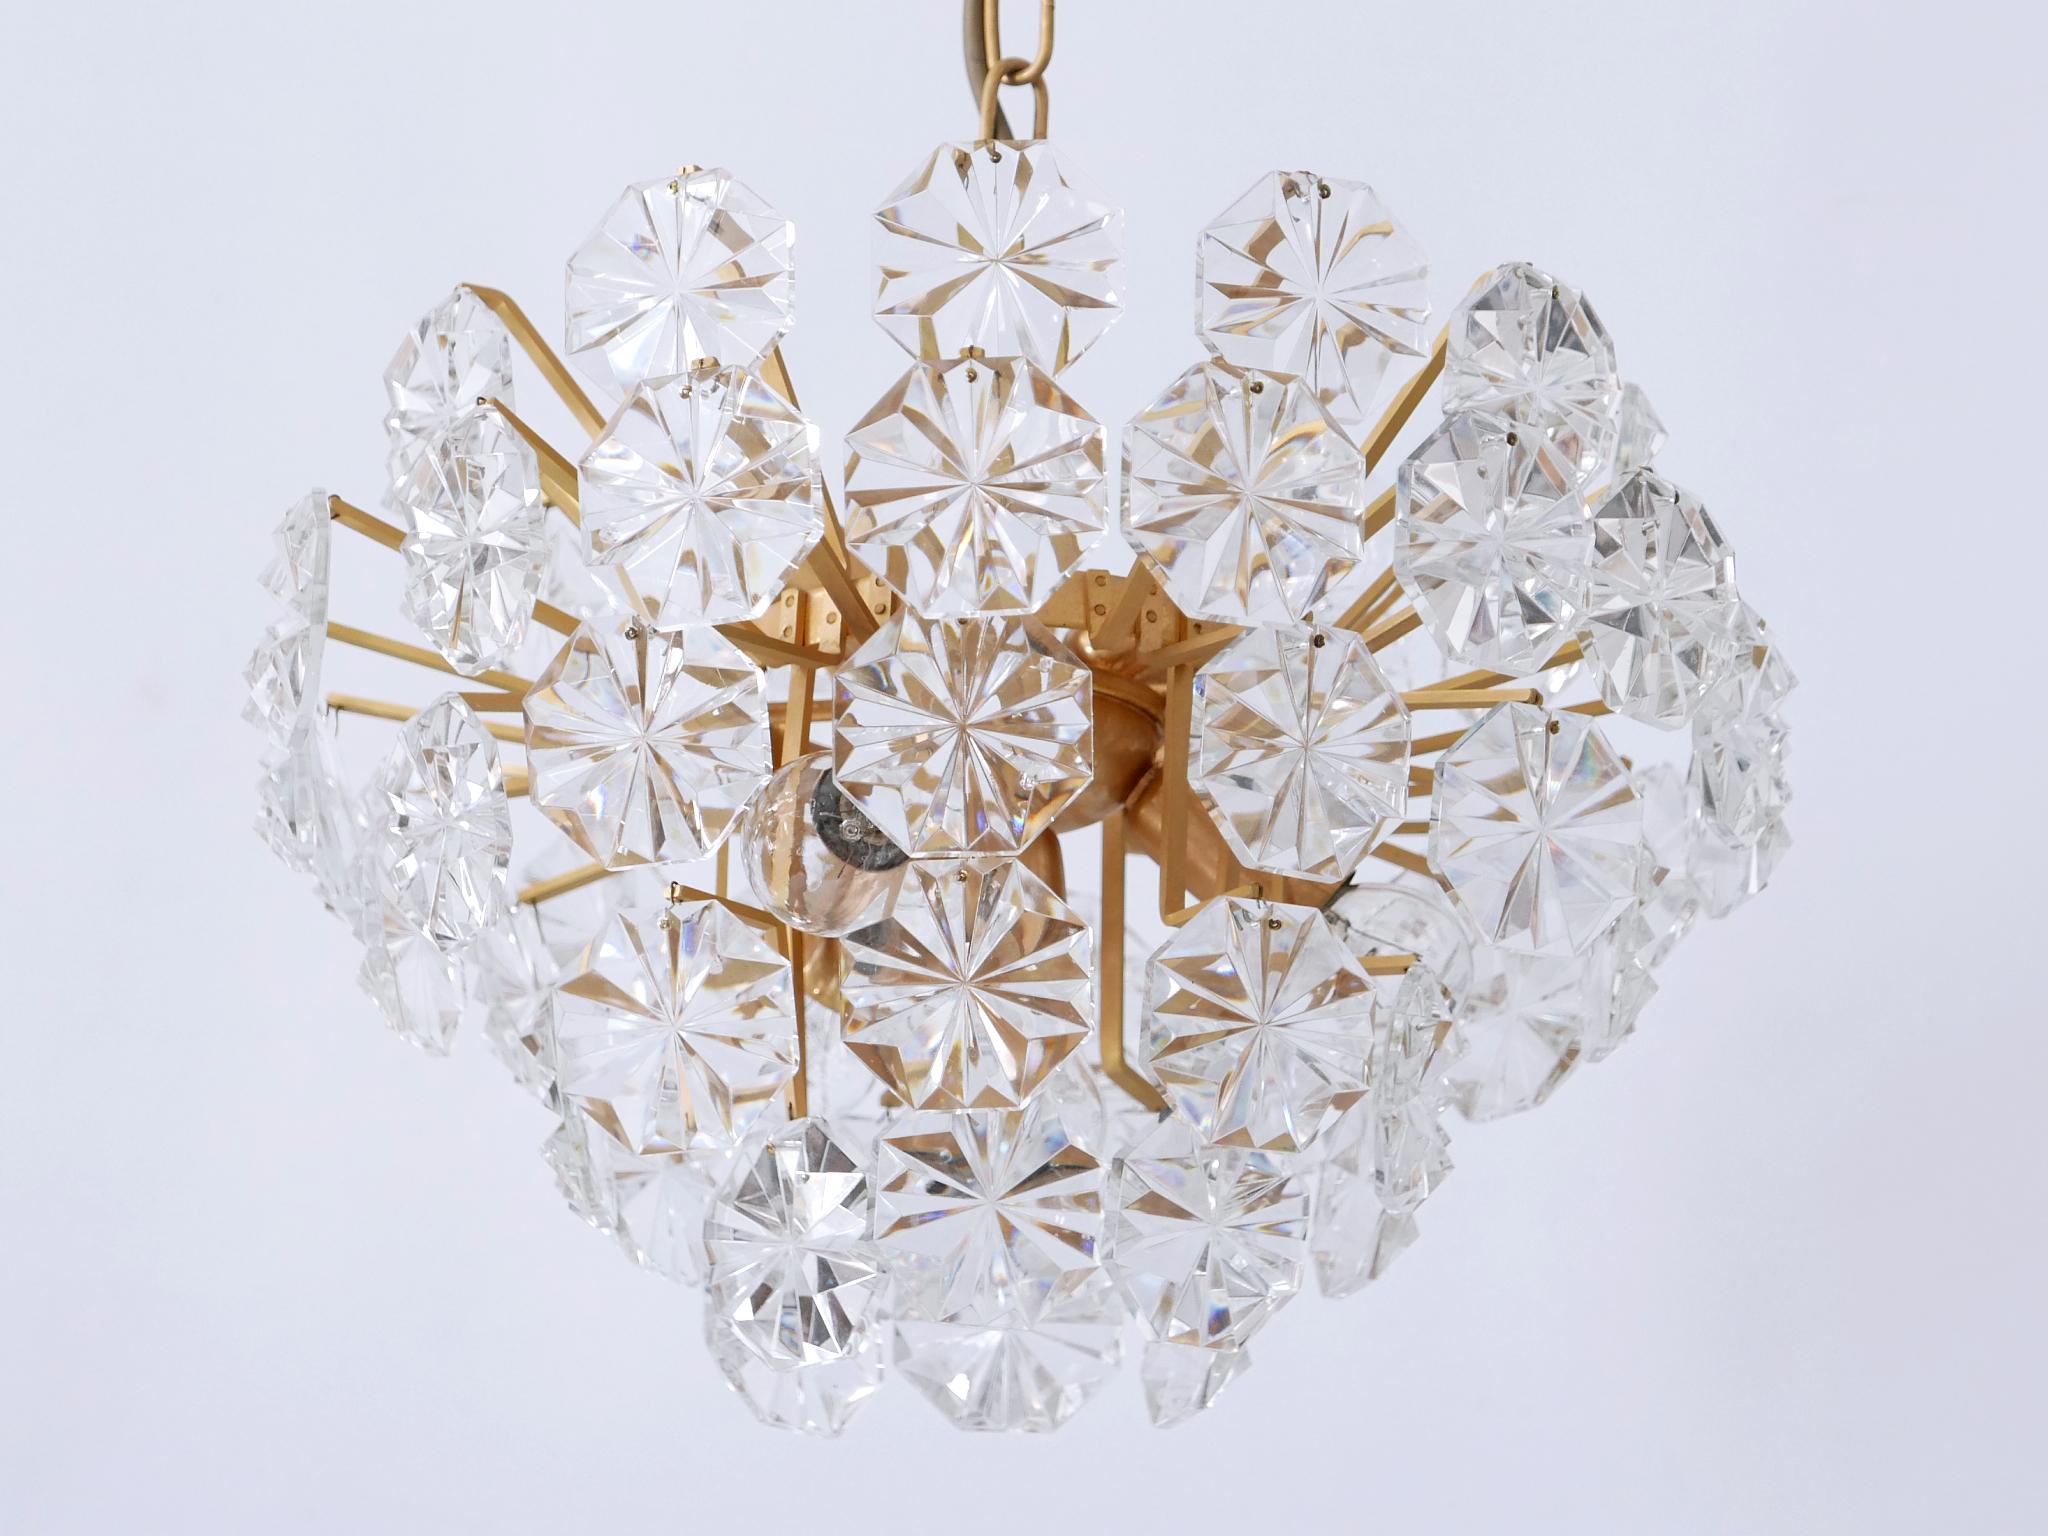 Elegant Mid Century Modern Crystal Chandelier by Christoph Palme Germany 1970s For Sale 1